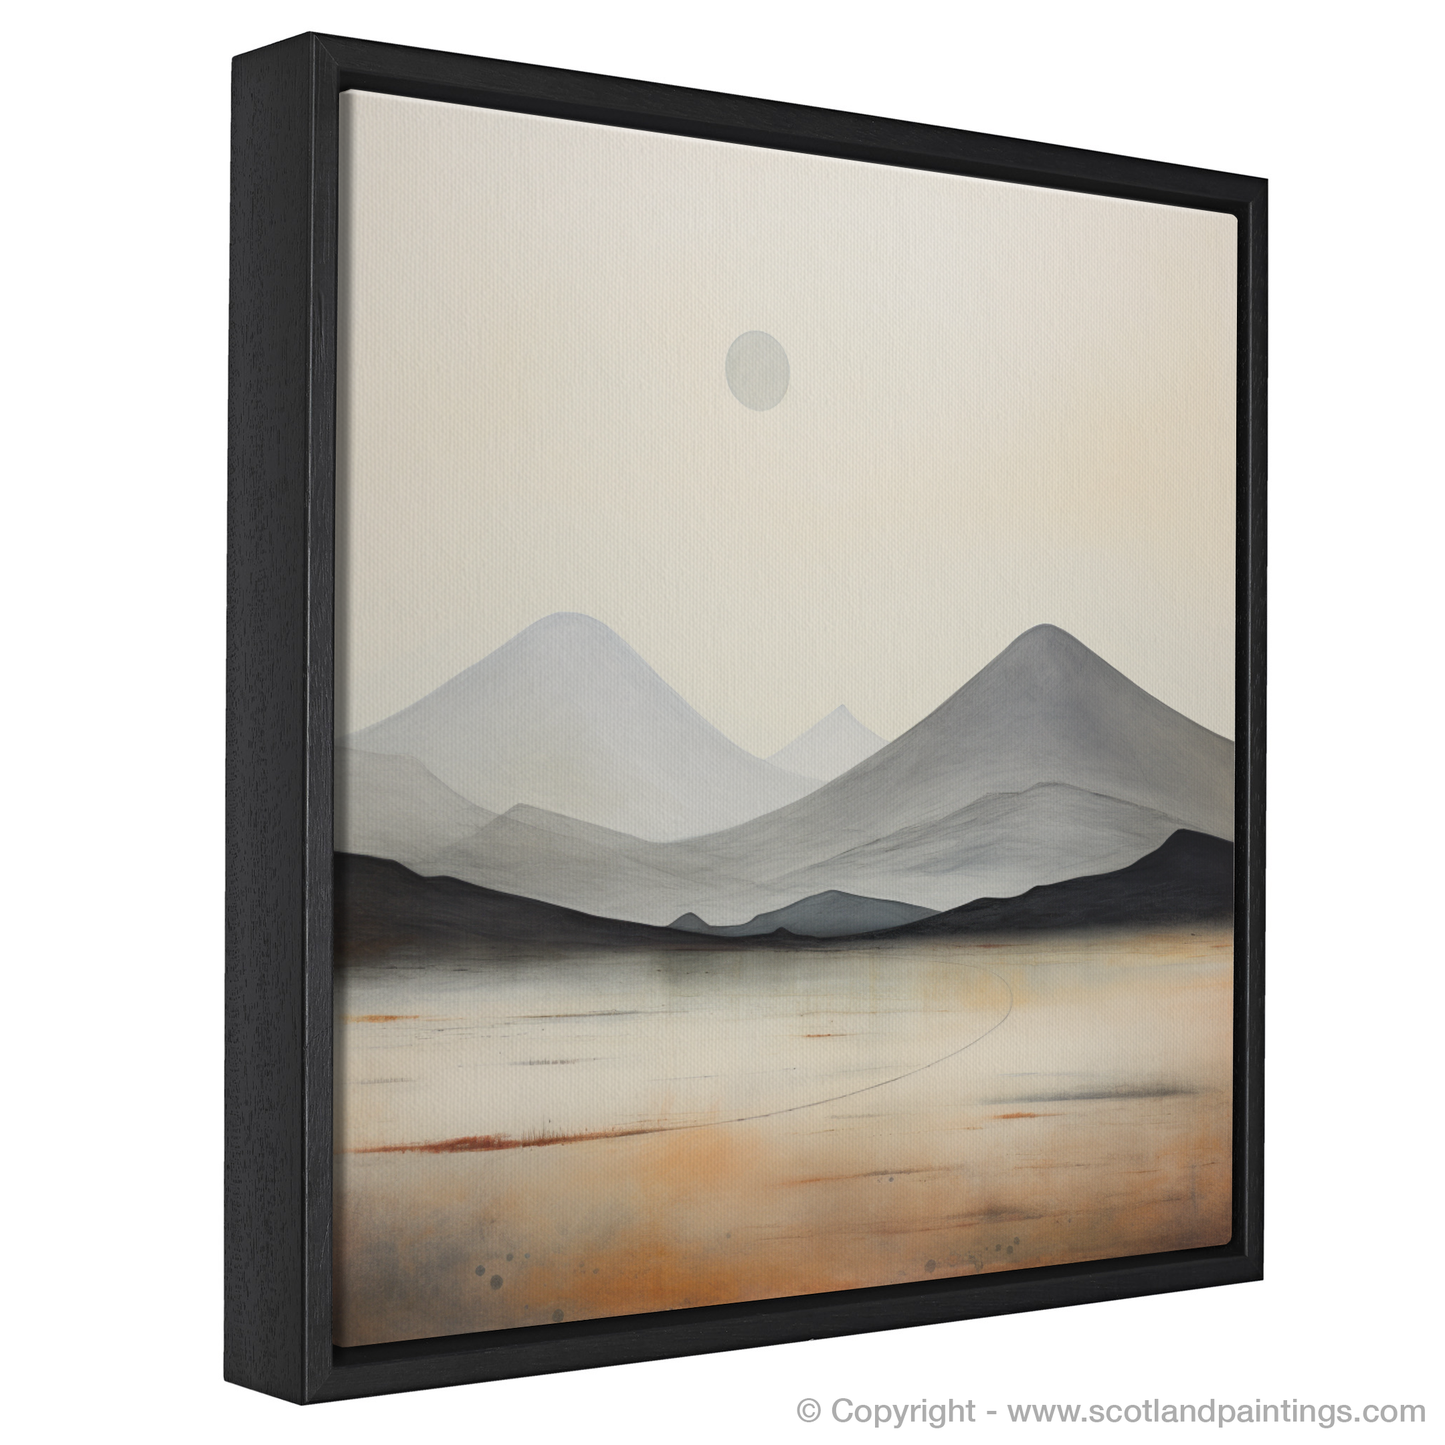 Painting and Art Print of Meall Greigh entitled "Highland Serenity: An Abstract Ode to Meall Greigh".